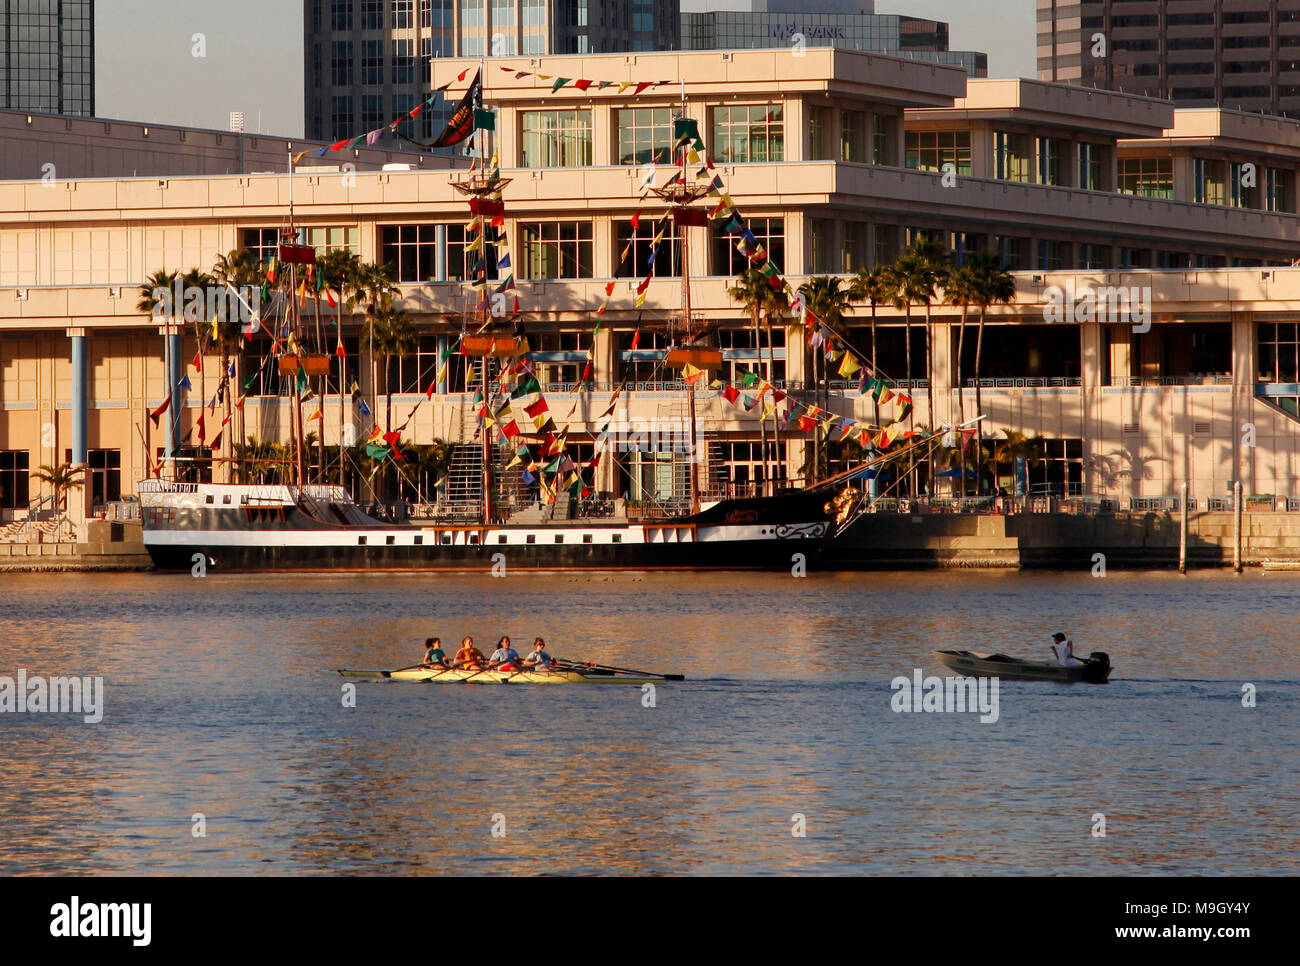 A team of rowers paddles in a crew boat along a pirate ship moored in Downtown Tampa, Florida. Stock Photo